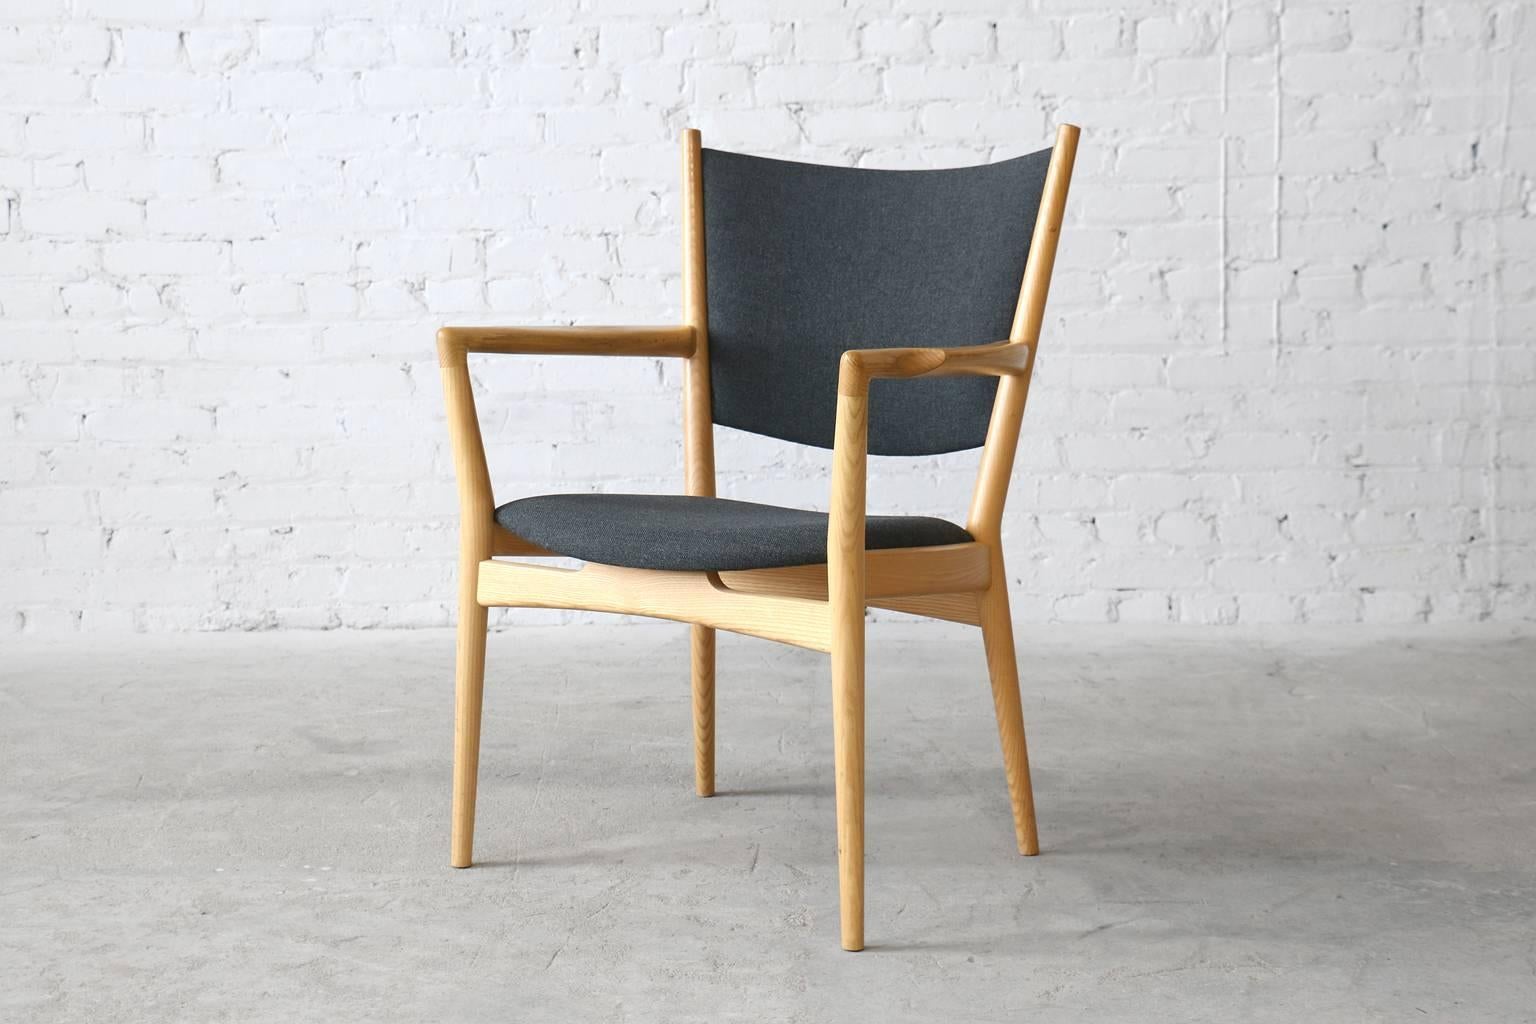 - model PP240
- designed in 1990
- solid ash frame
- original Danish wool upholstery

A set of six Hans Wegner PP240 vintage Danish modern ash armchairs for PP Møbler. This comfortable armchair design was one of Wegner's last chair designs and